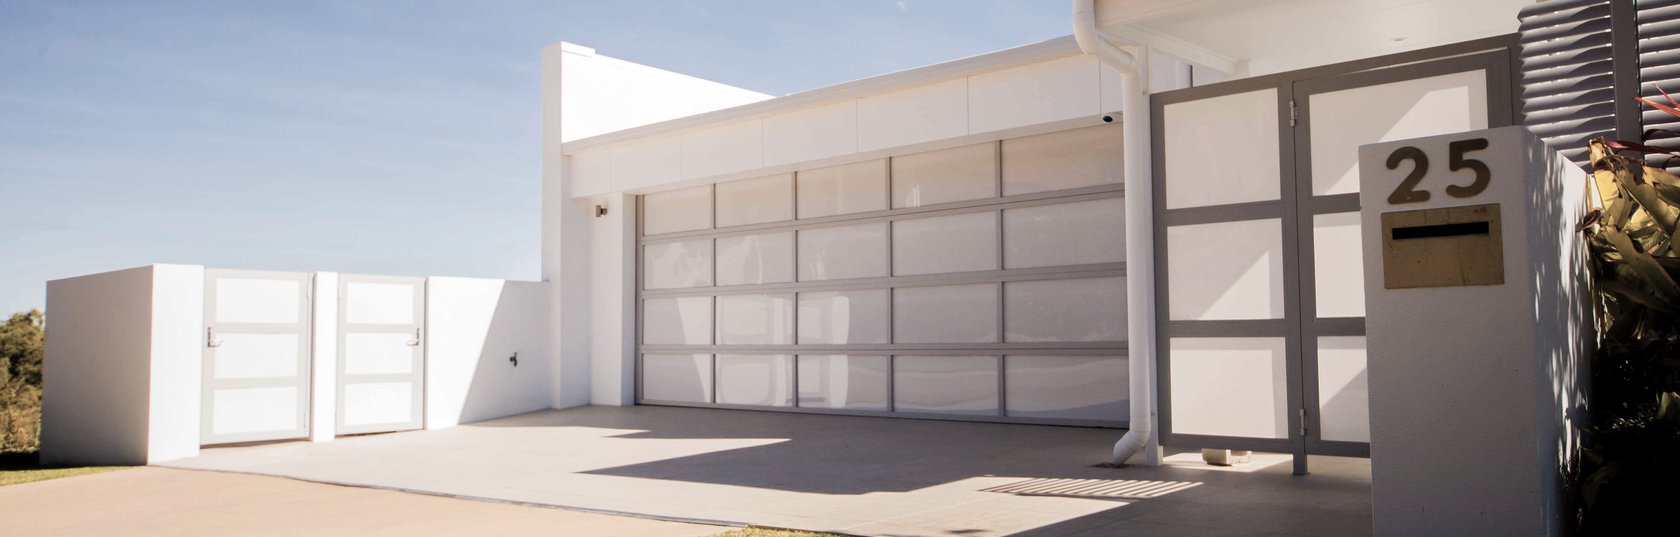 Garage Doors – Choosing the Material, Style and Colour That Suits Your Home Best